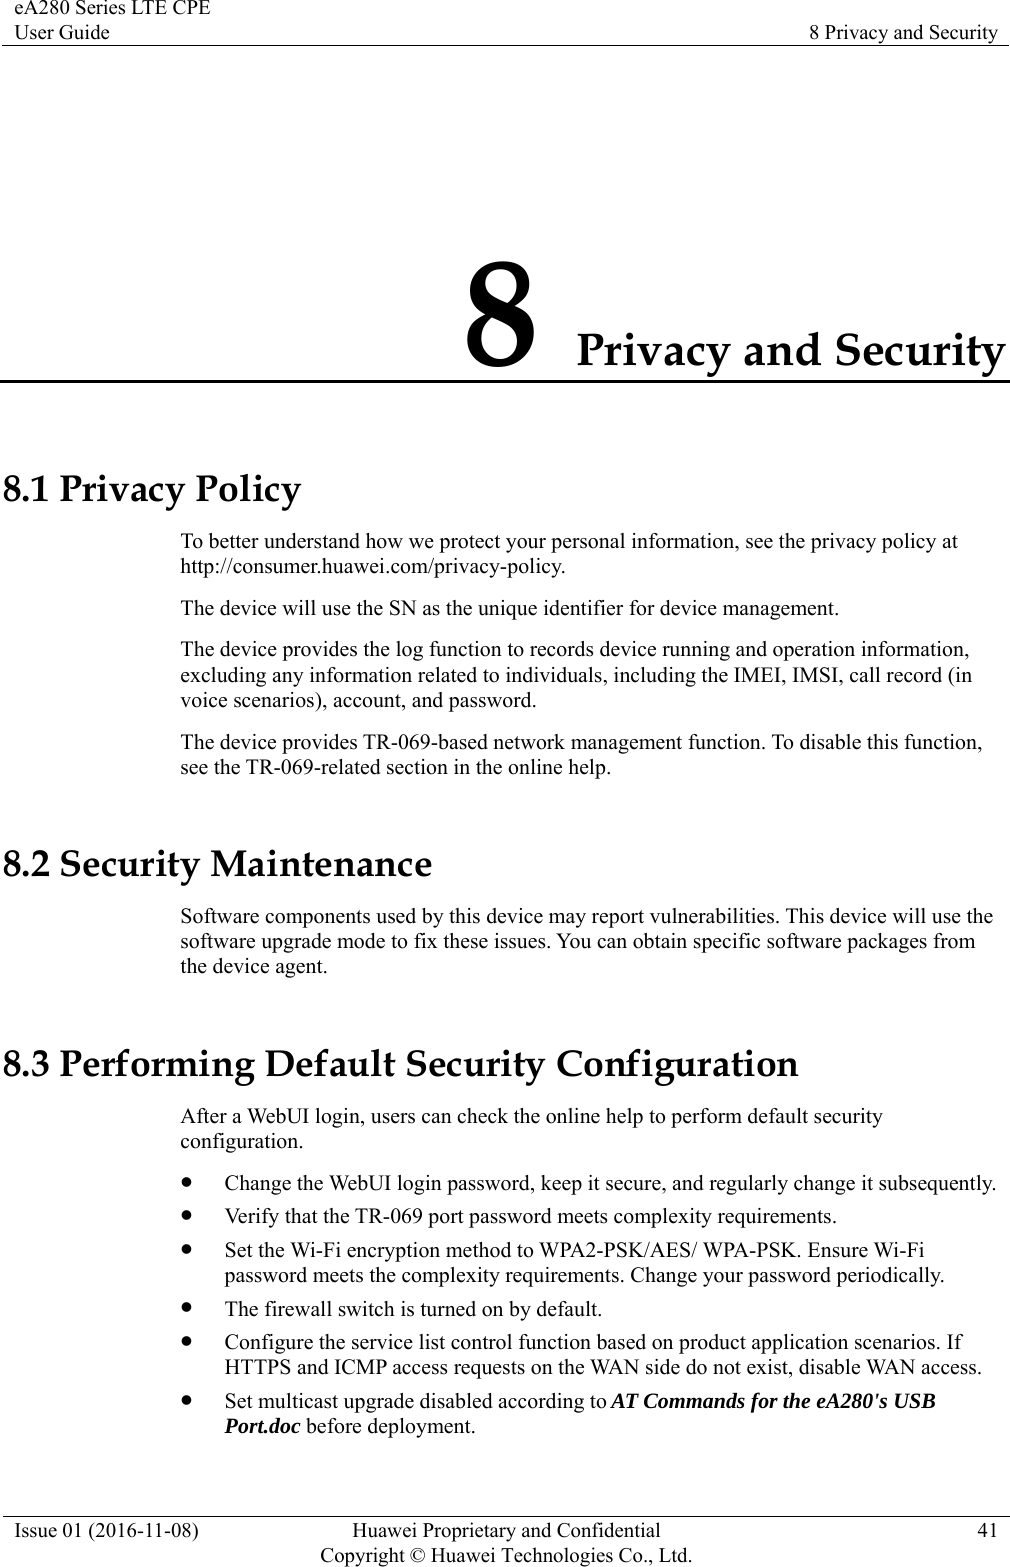 eA280 Series LTE CPE User Guide  8 Privacy and Security Issue 01 (2016-11-08)  Huawei Proprietary and Confidential         Copyright © Huawei Technologies Co., Ltd.41 8 Privacy and Security 8.1 Privacy Policy To better understand how we protect your personal information, see the privacy policy at http://consumer.huawei.com/privacy-policy. The device will use the SN as the unique identifier for device management. The device provides the log function to records device running and operation information, excluding any information related to individuals, including the IMEI, IMSI, call record (in voice scenarios), account, and password.   The device provides TR-069-based network management function. To disable this function, see the TR-069-related section in the online help. 8.2 Security Maintenance Software components used by this device may report vulnerabilities. This device will use the software upgrade mode to fix these issues. You can obtain specific software packages from the device agent. 8.3 Performing Default Security Configuration After a WebUI login, users can check the online help to perform default security configuration.  Change the WebUI login password, keep it secure, and regularly change it subsequently.  Verify that the TR-069 port password meets complexity requirements.  Set the Wi-Fi encryption method to WPA2-PSK/AES/ WPA-PSK. Ensure Wi-Fi password meets the complexity requirements. Change your password periodically.  The firewall switch is turned on by default.  Configure the service list control function based on product application scenarios. If HTTPS and ICMP access requests on the WAN side do not exist, disable WAN access.  Set multicast upgrade disabled according to AT Commands for the eA280&apos;s USB Port.doc before deployment. 